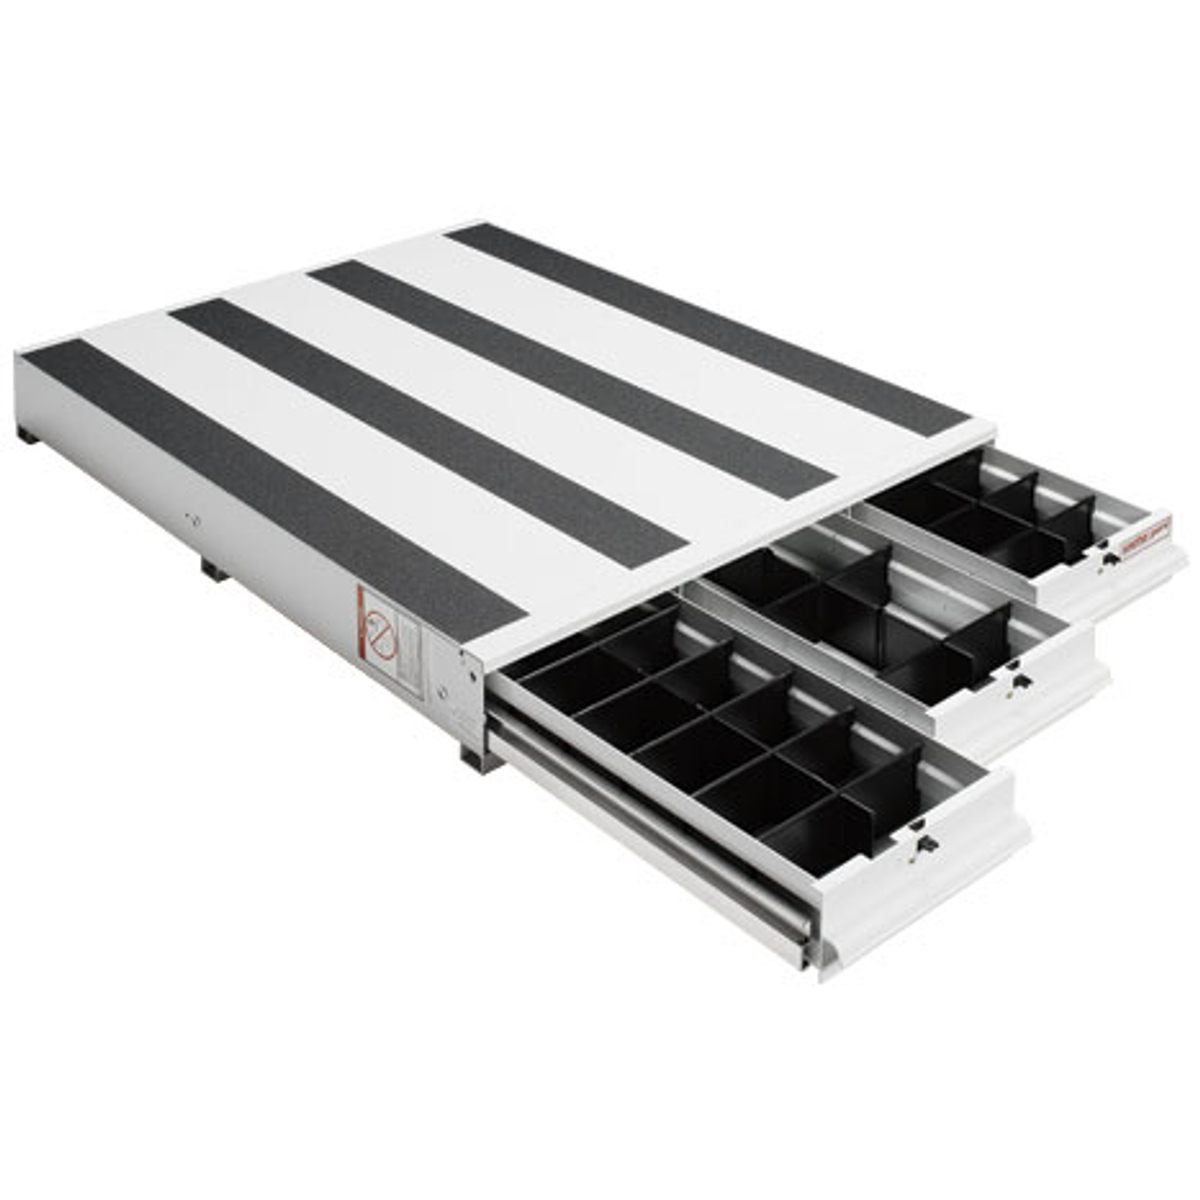 2.9” Drawer Divider II – 5 Compartment